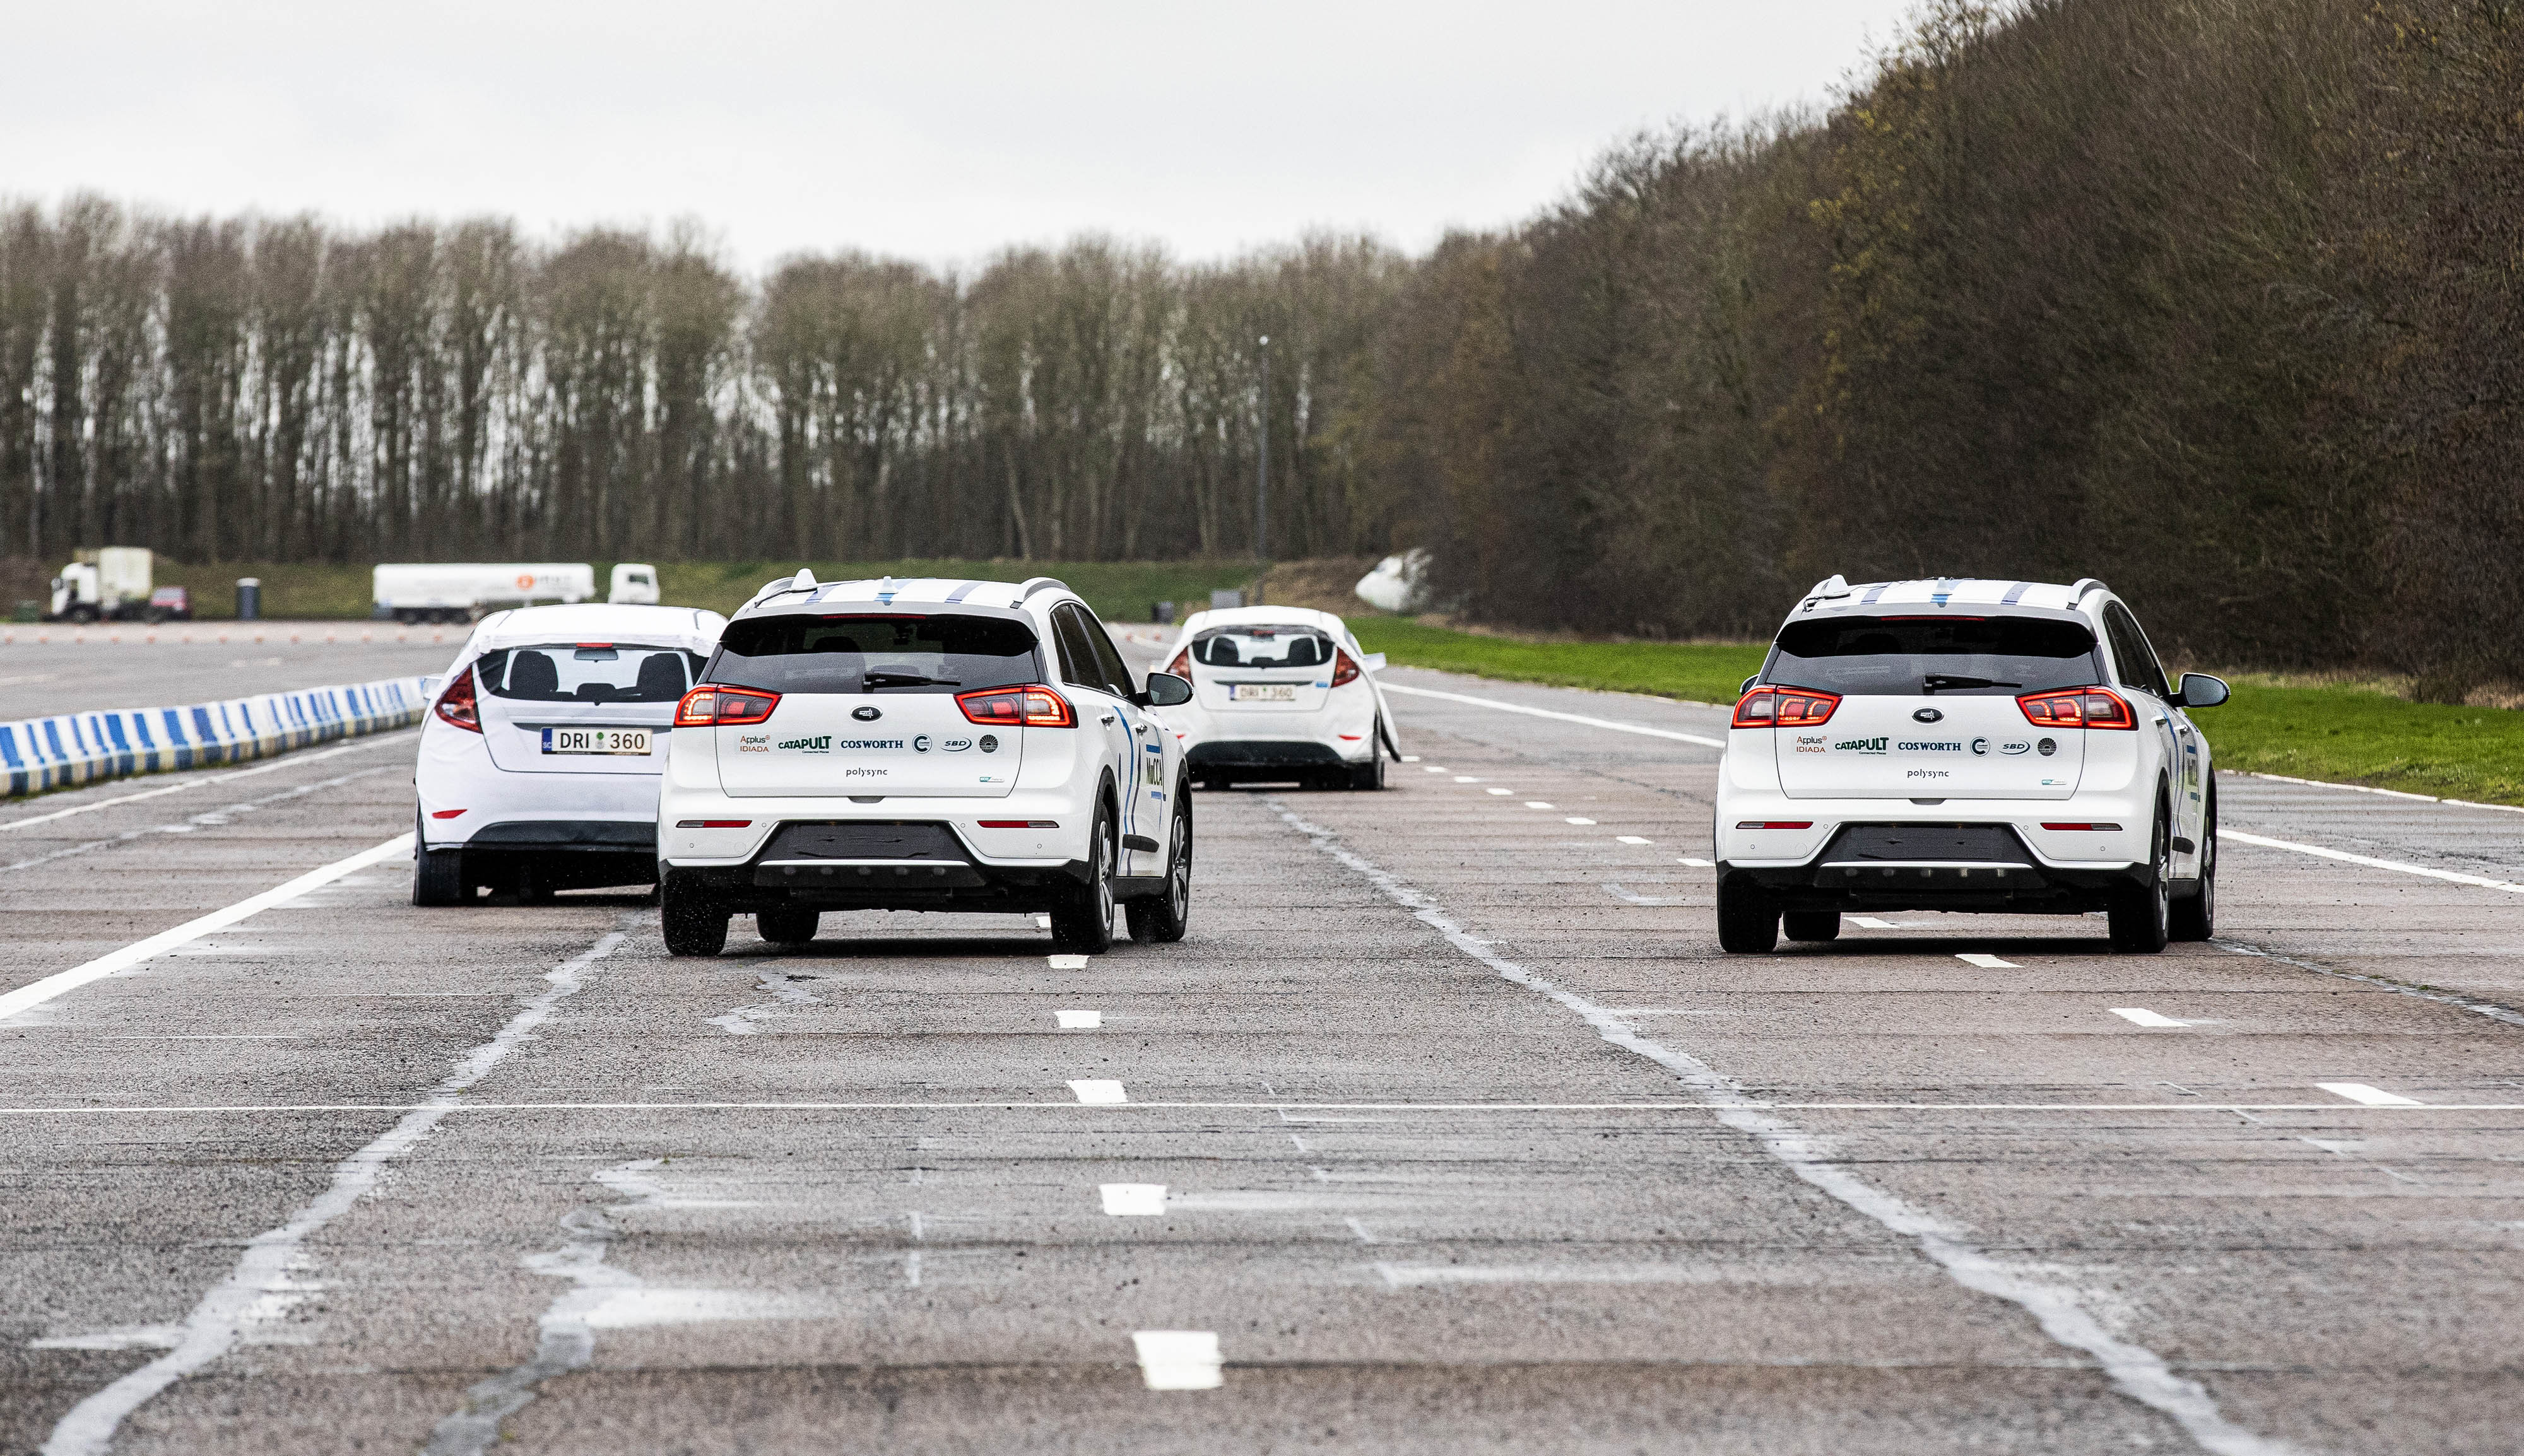 Mucca develops technology to reduce fatalities at UK motorways (Source: MuccA)